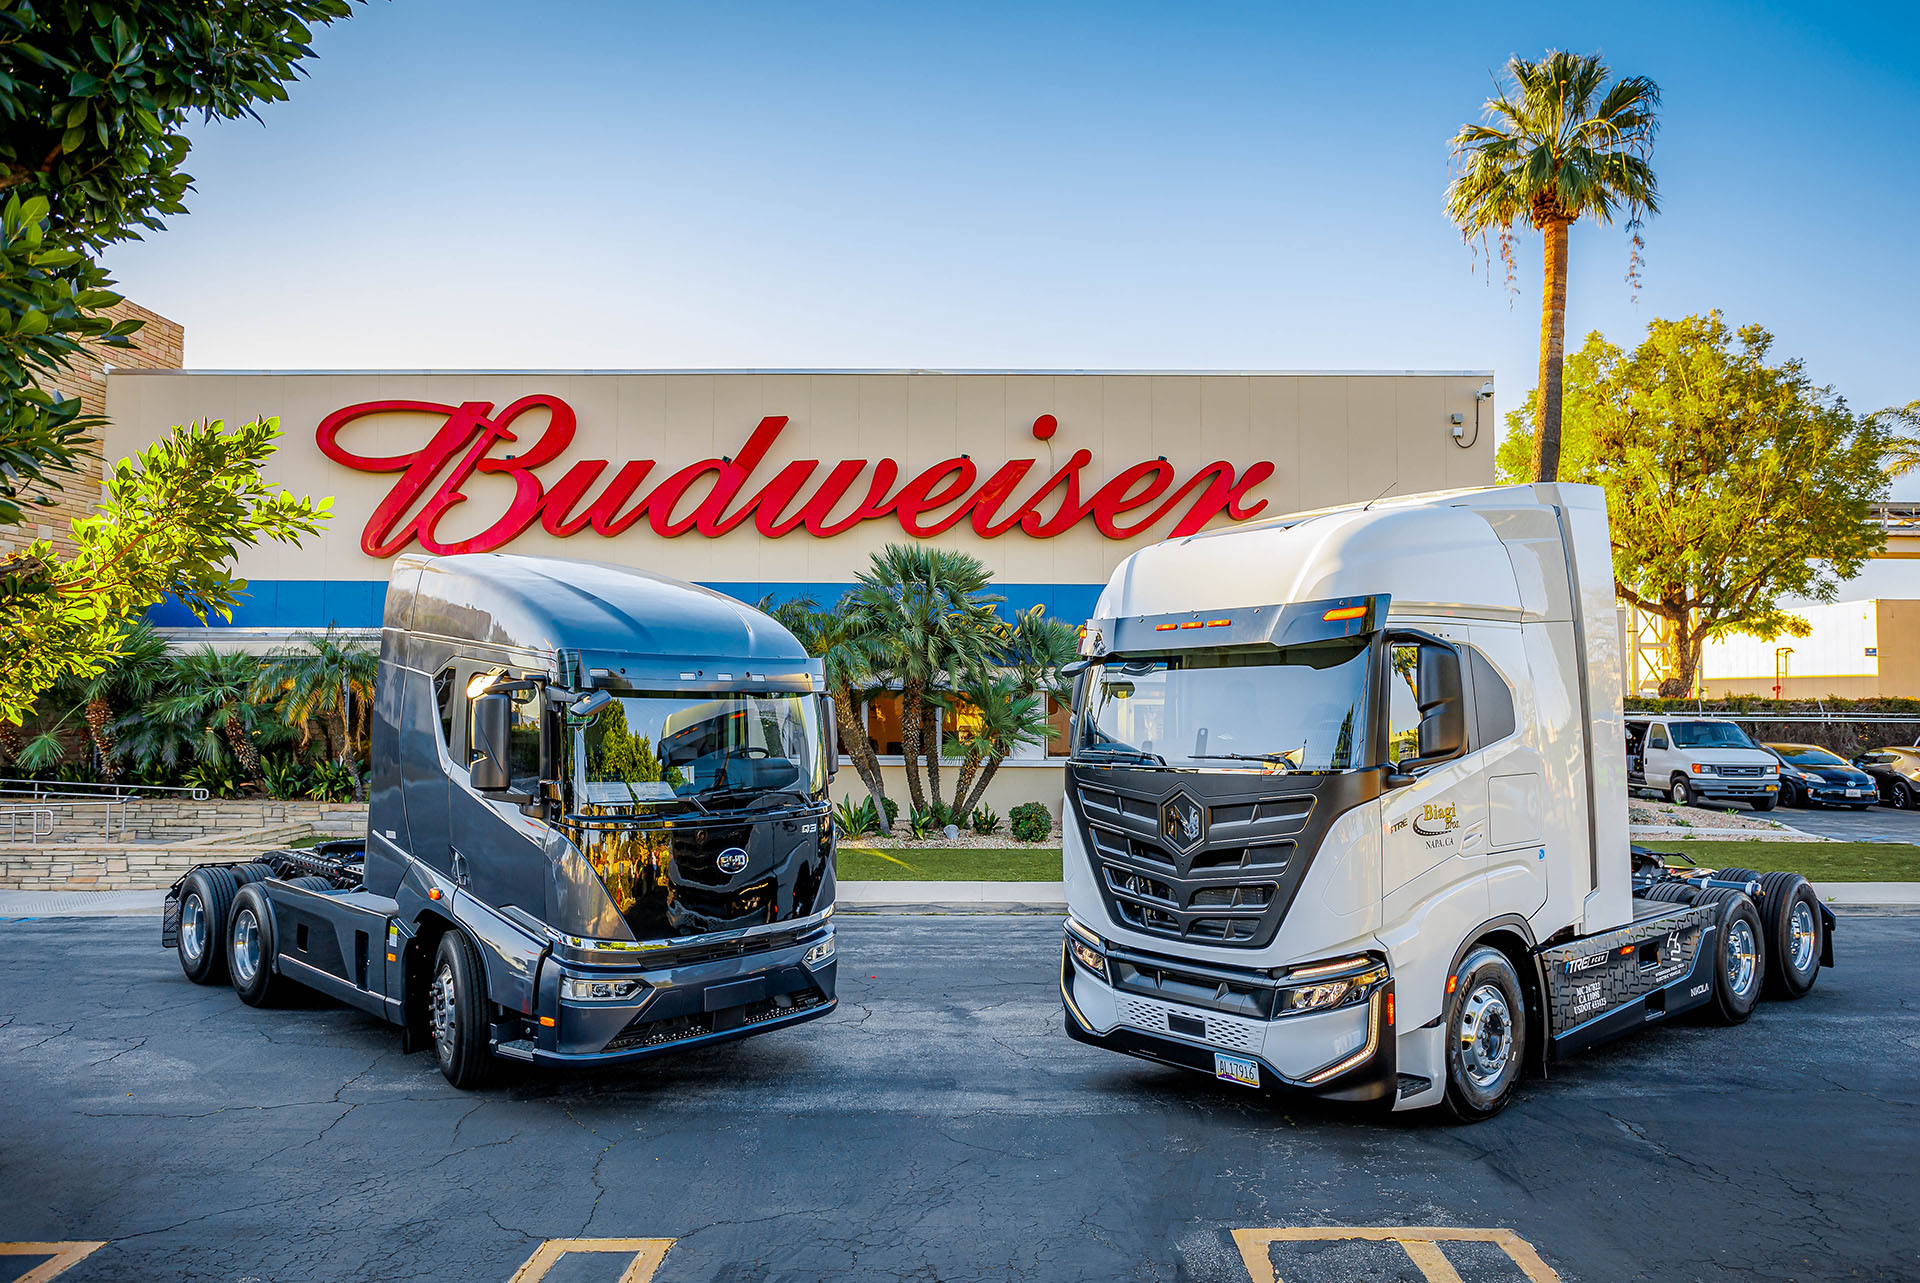 More Game Day Cheers, Less Emissions - Anheuser-Busch Delivers New Era of Beer with Innovative Zero-Emission Fleet